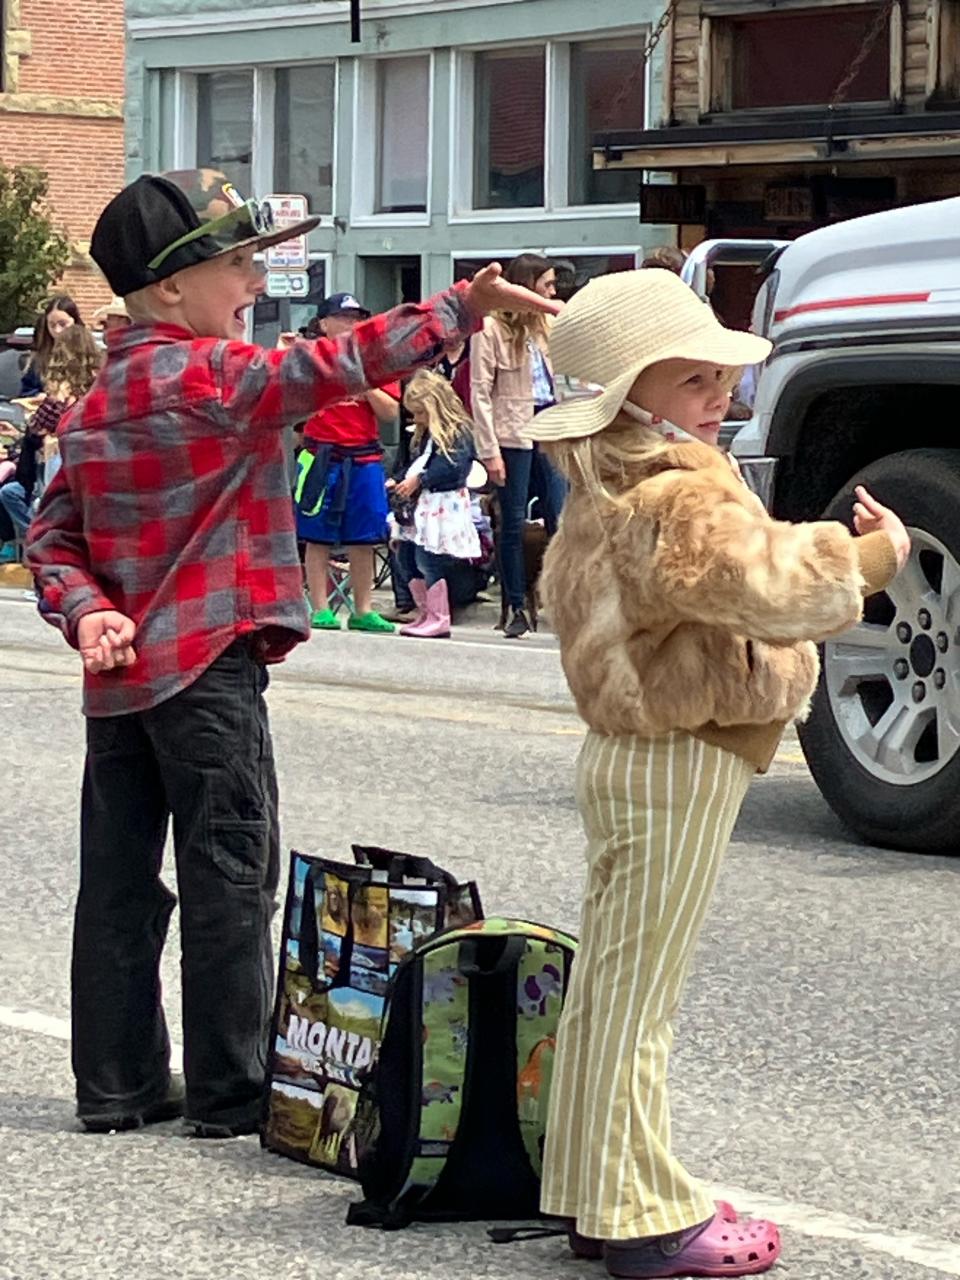 Children line up to catch candy thrown during the Fourth of July parade in Red Lodge, Montana, which dates back to 1929. Columnist Carrie Seidman is on a writer's retreat in Red Lodge.